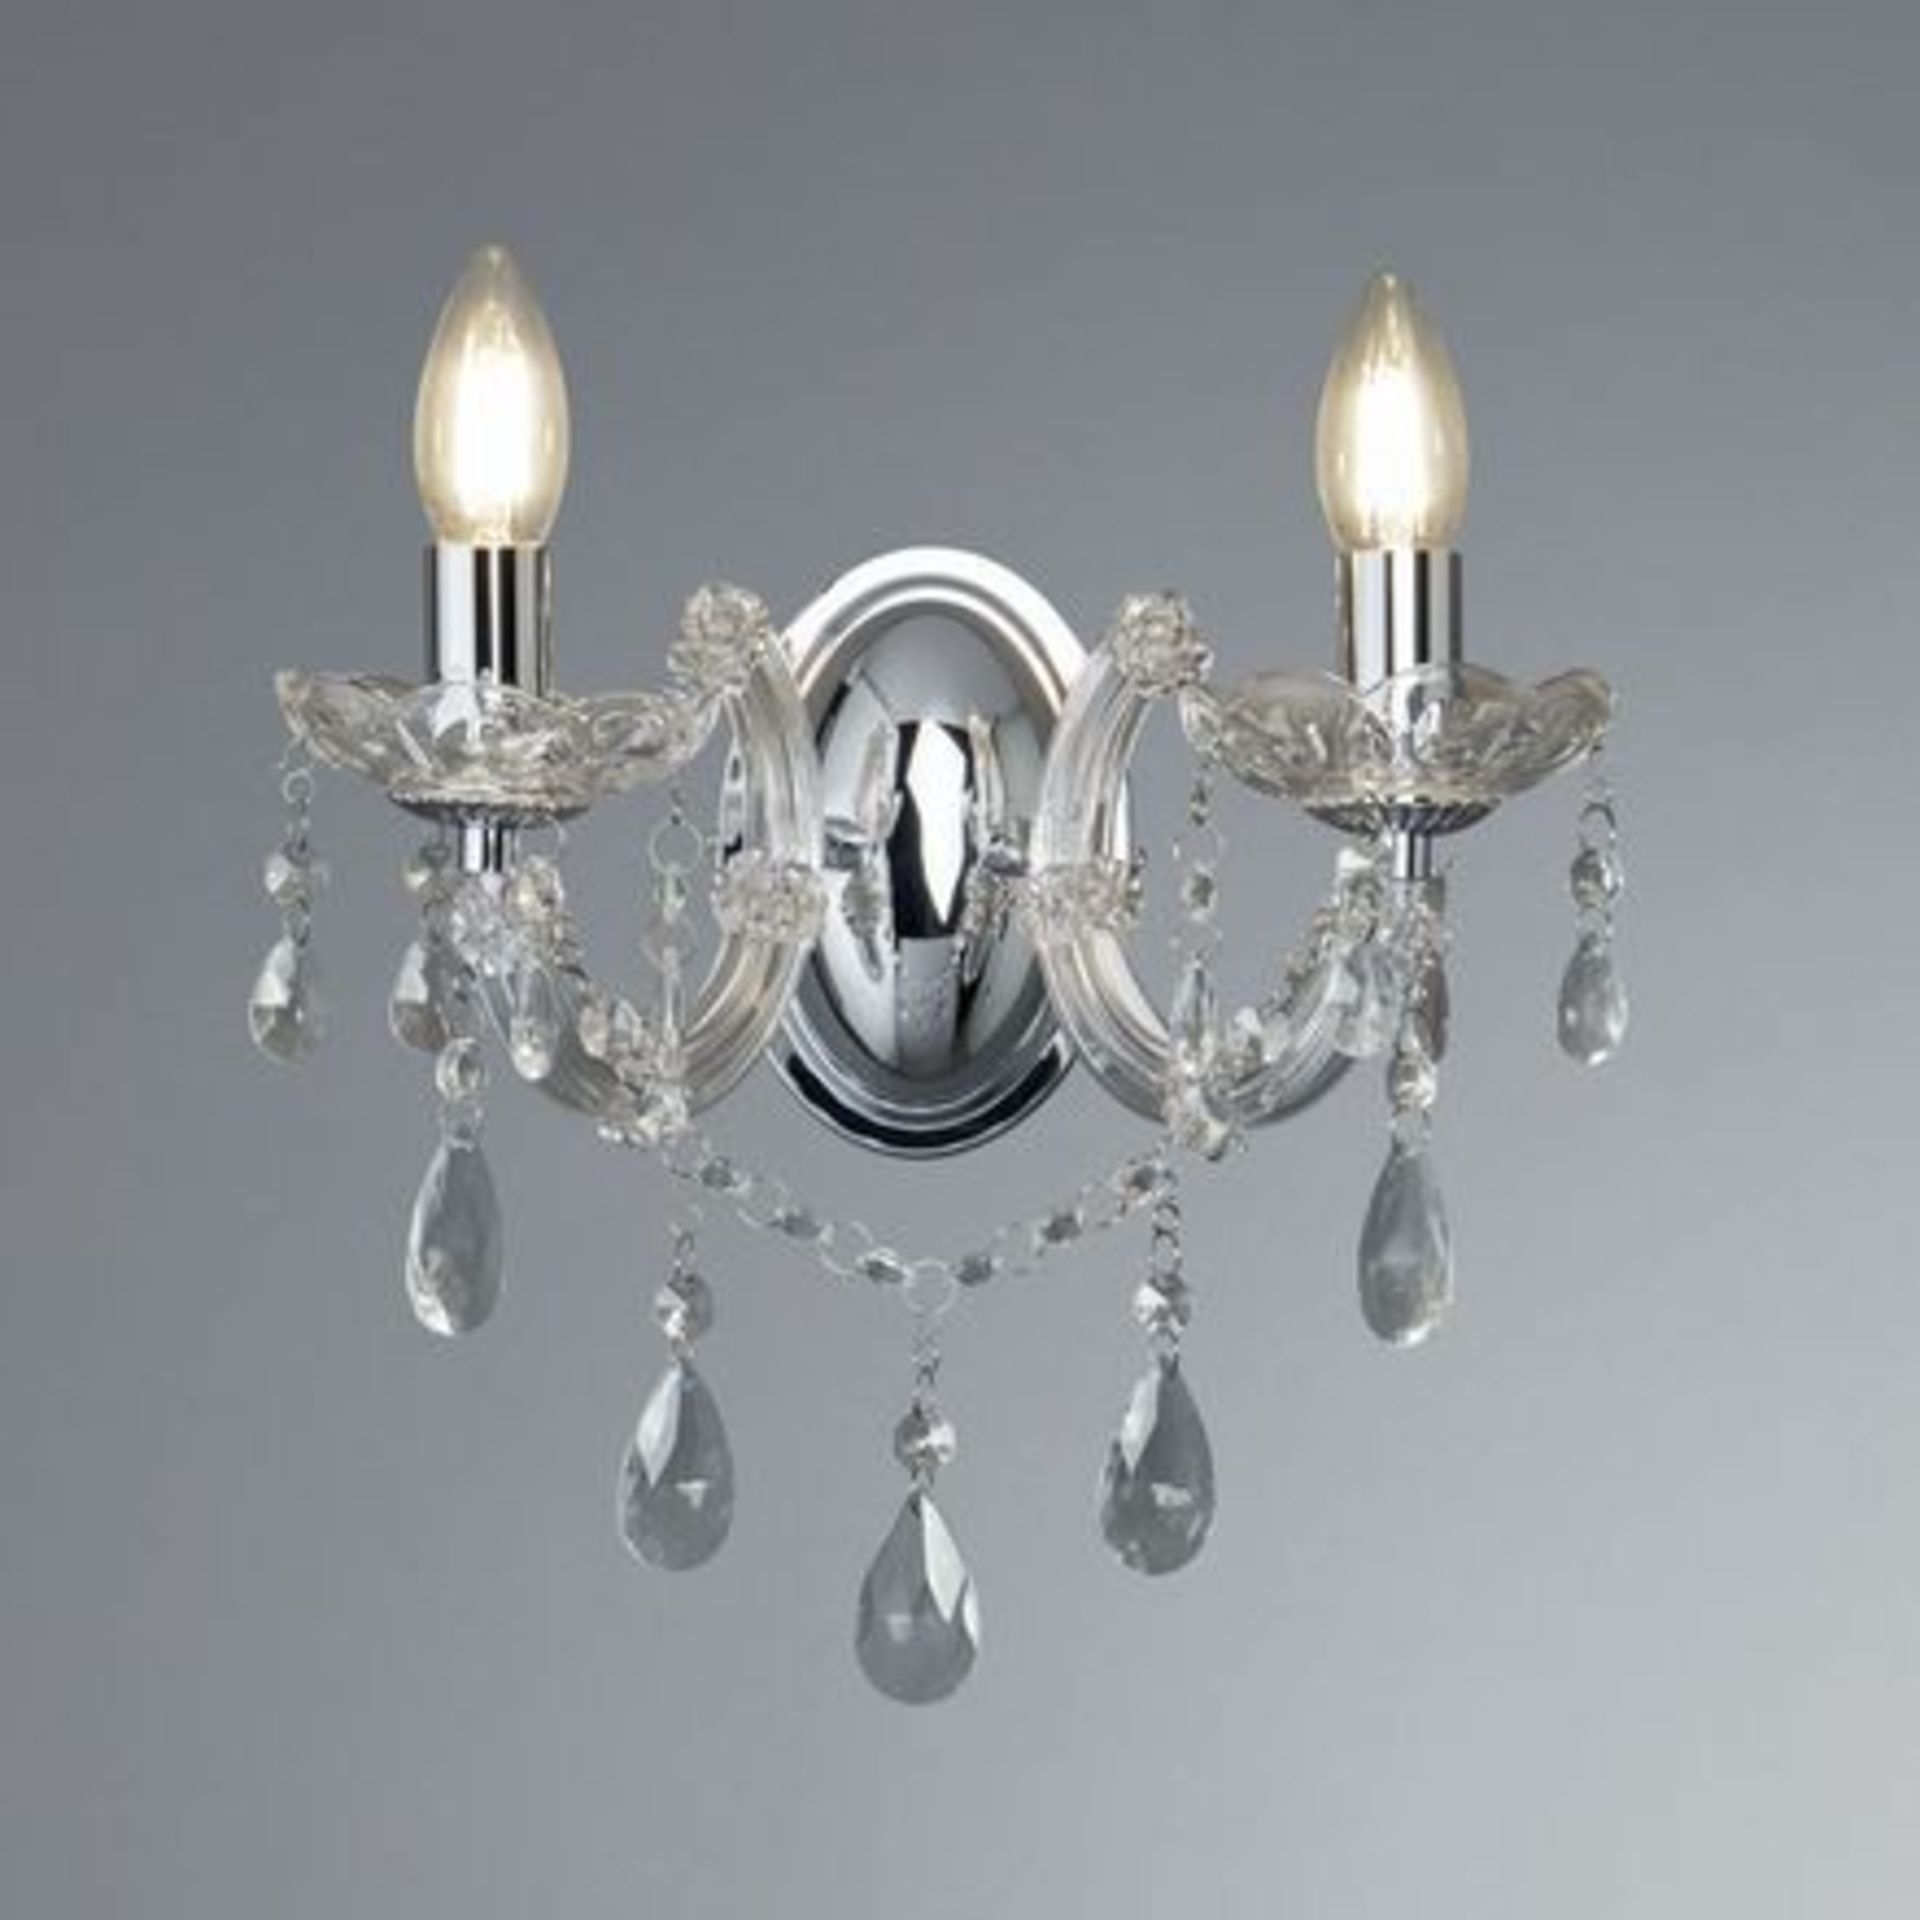 Crystal Chandelier twin wall sconce The Crystal lighting collection is inspired by the elaborate